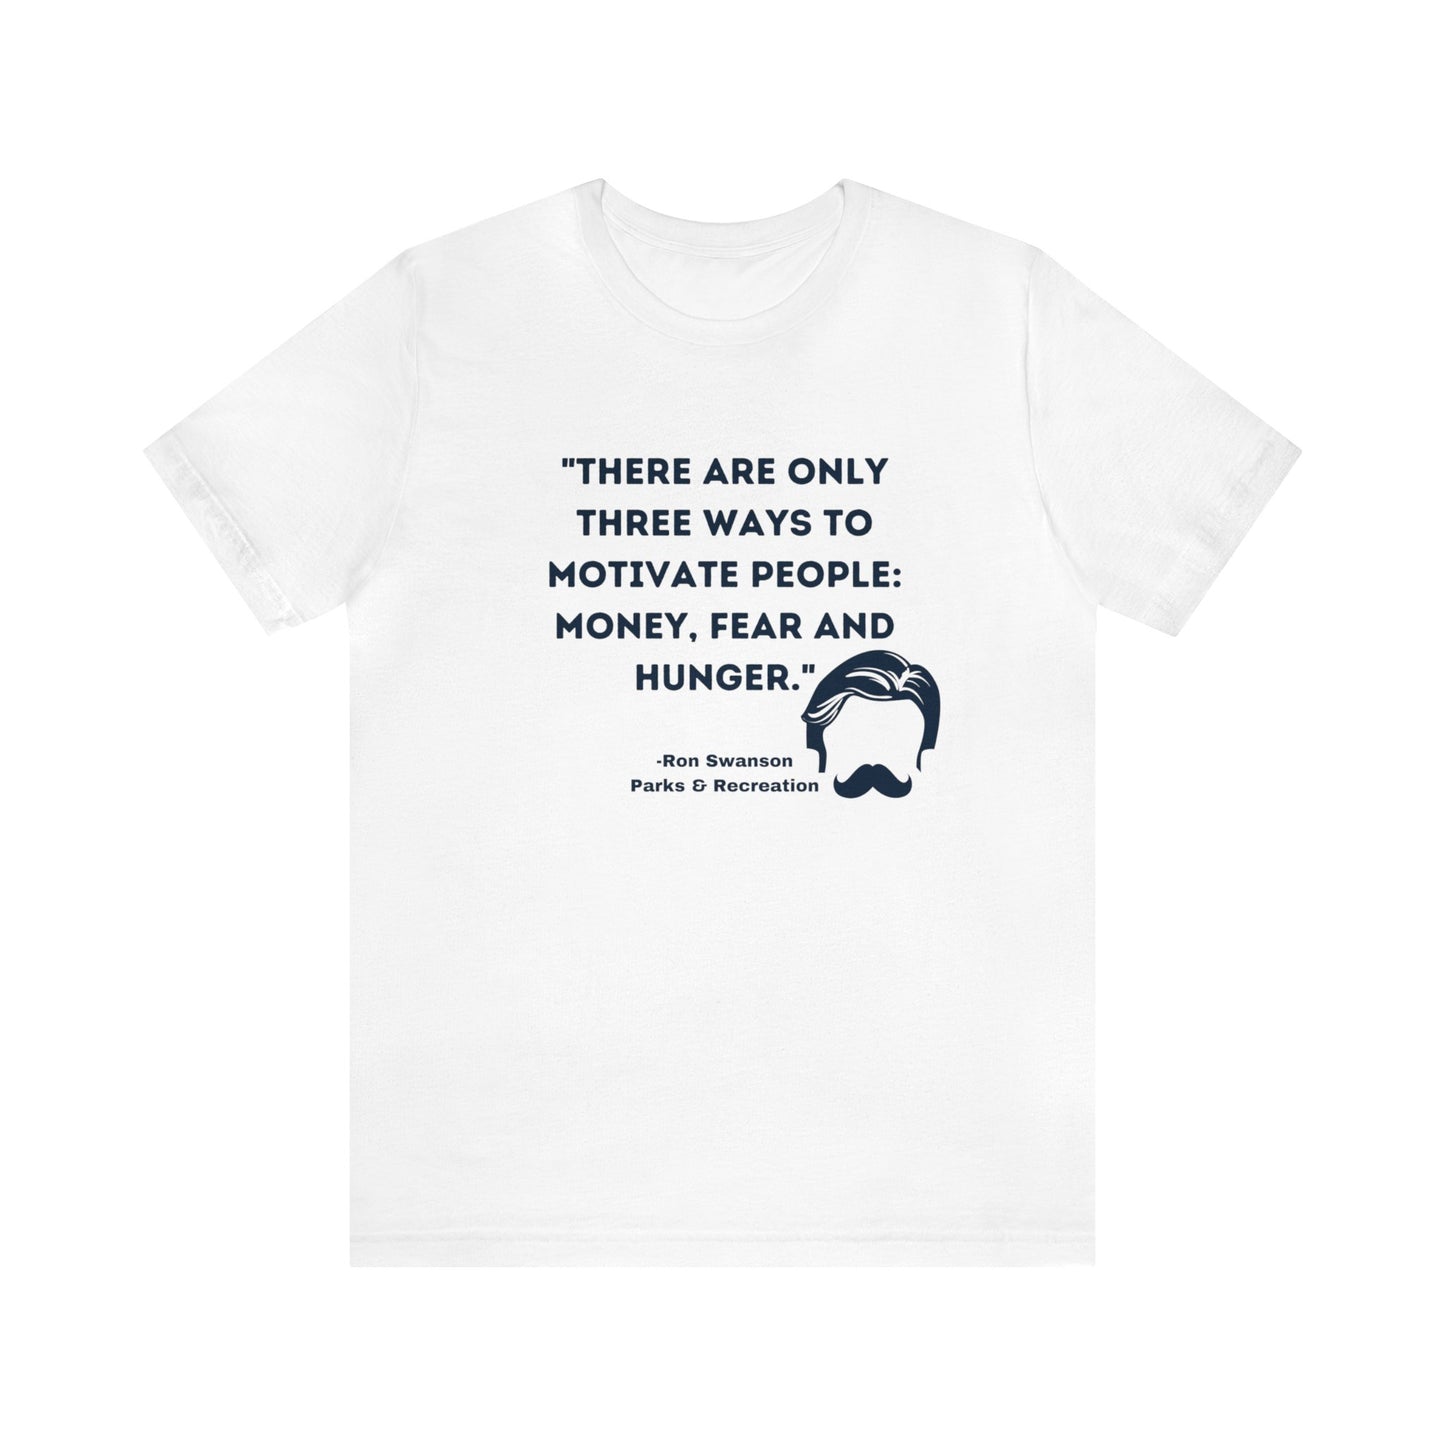 Parks and Recreation funny tee / Ron Swanson quote t-shirt/ Fan of Parks and rec gift